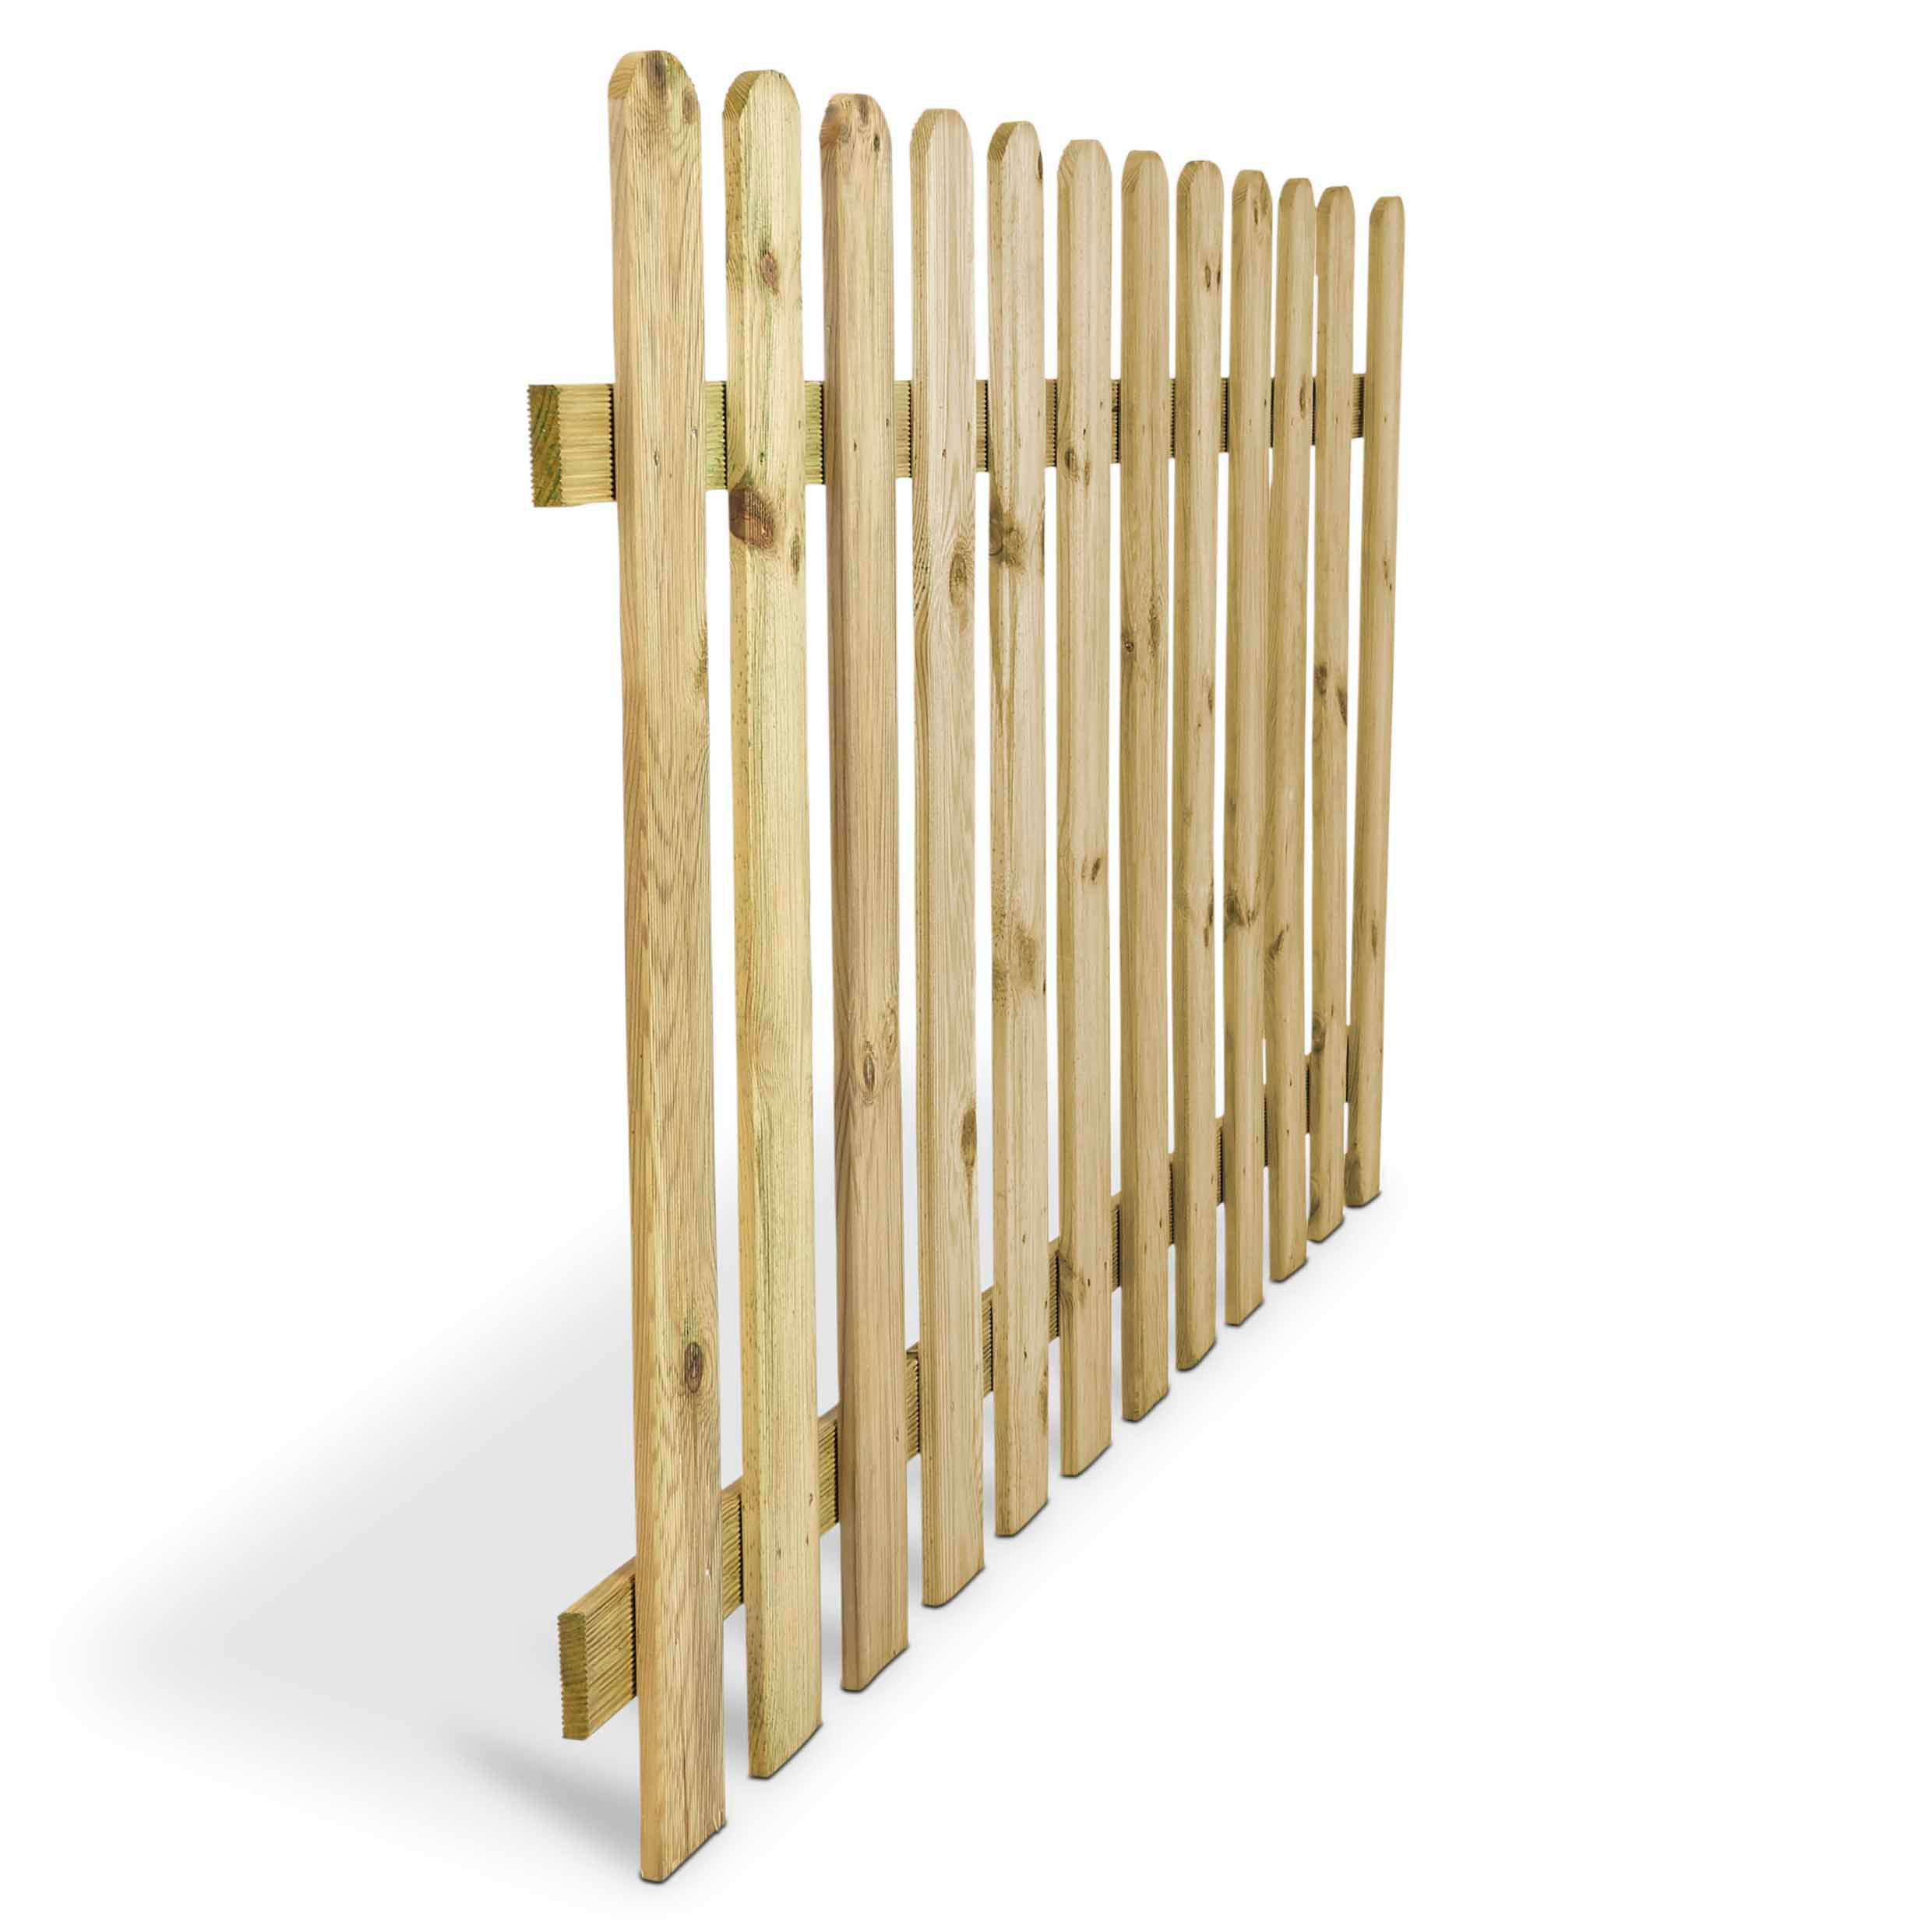 Blooma Mekong Pressure treated Wooden Picket fence (W)1.8m (H)1m